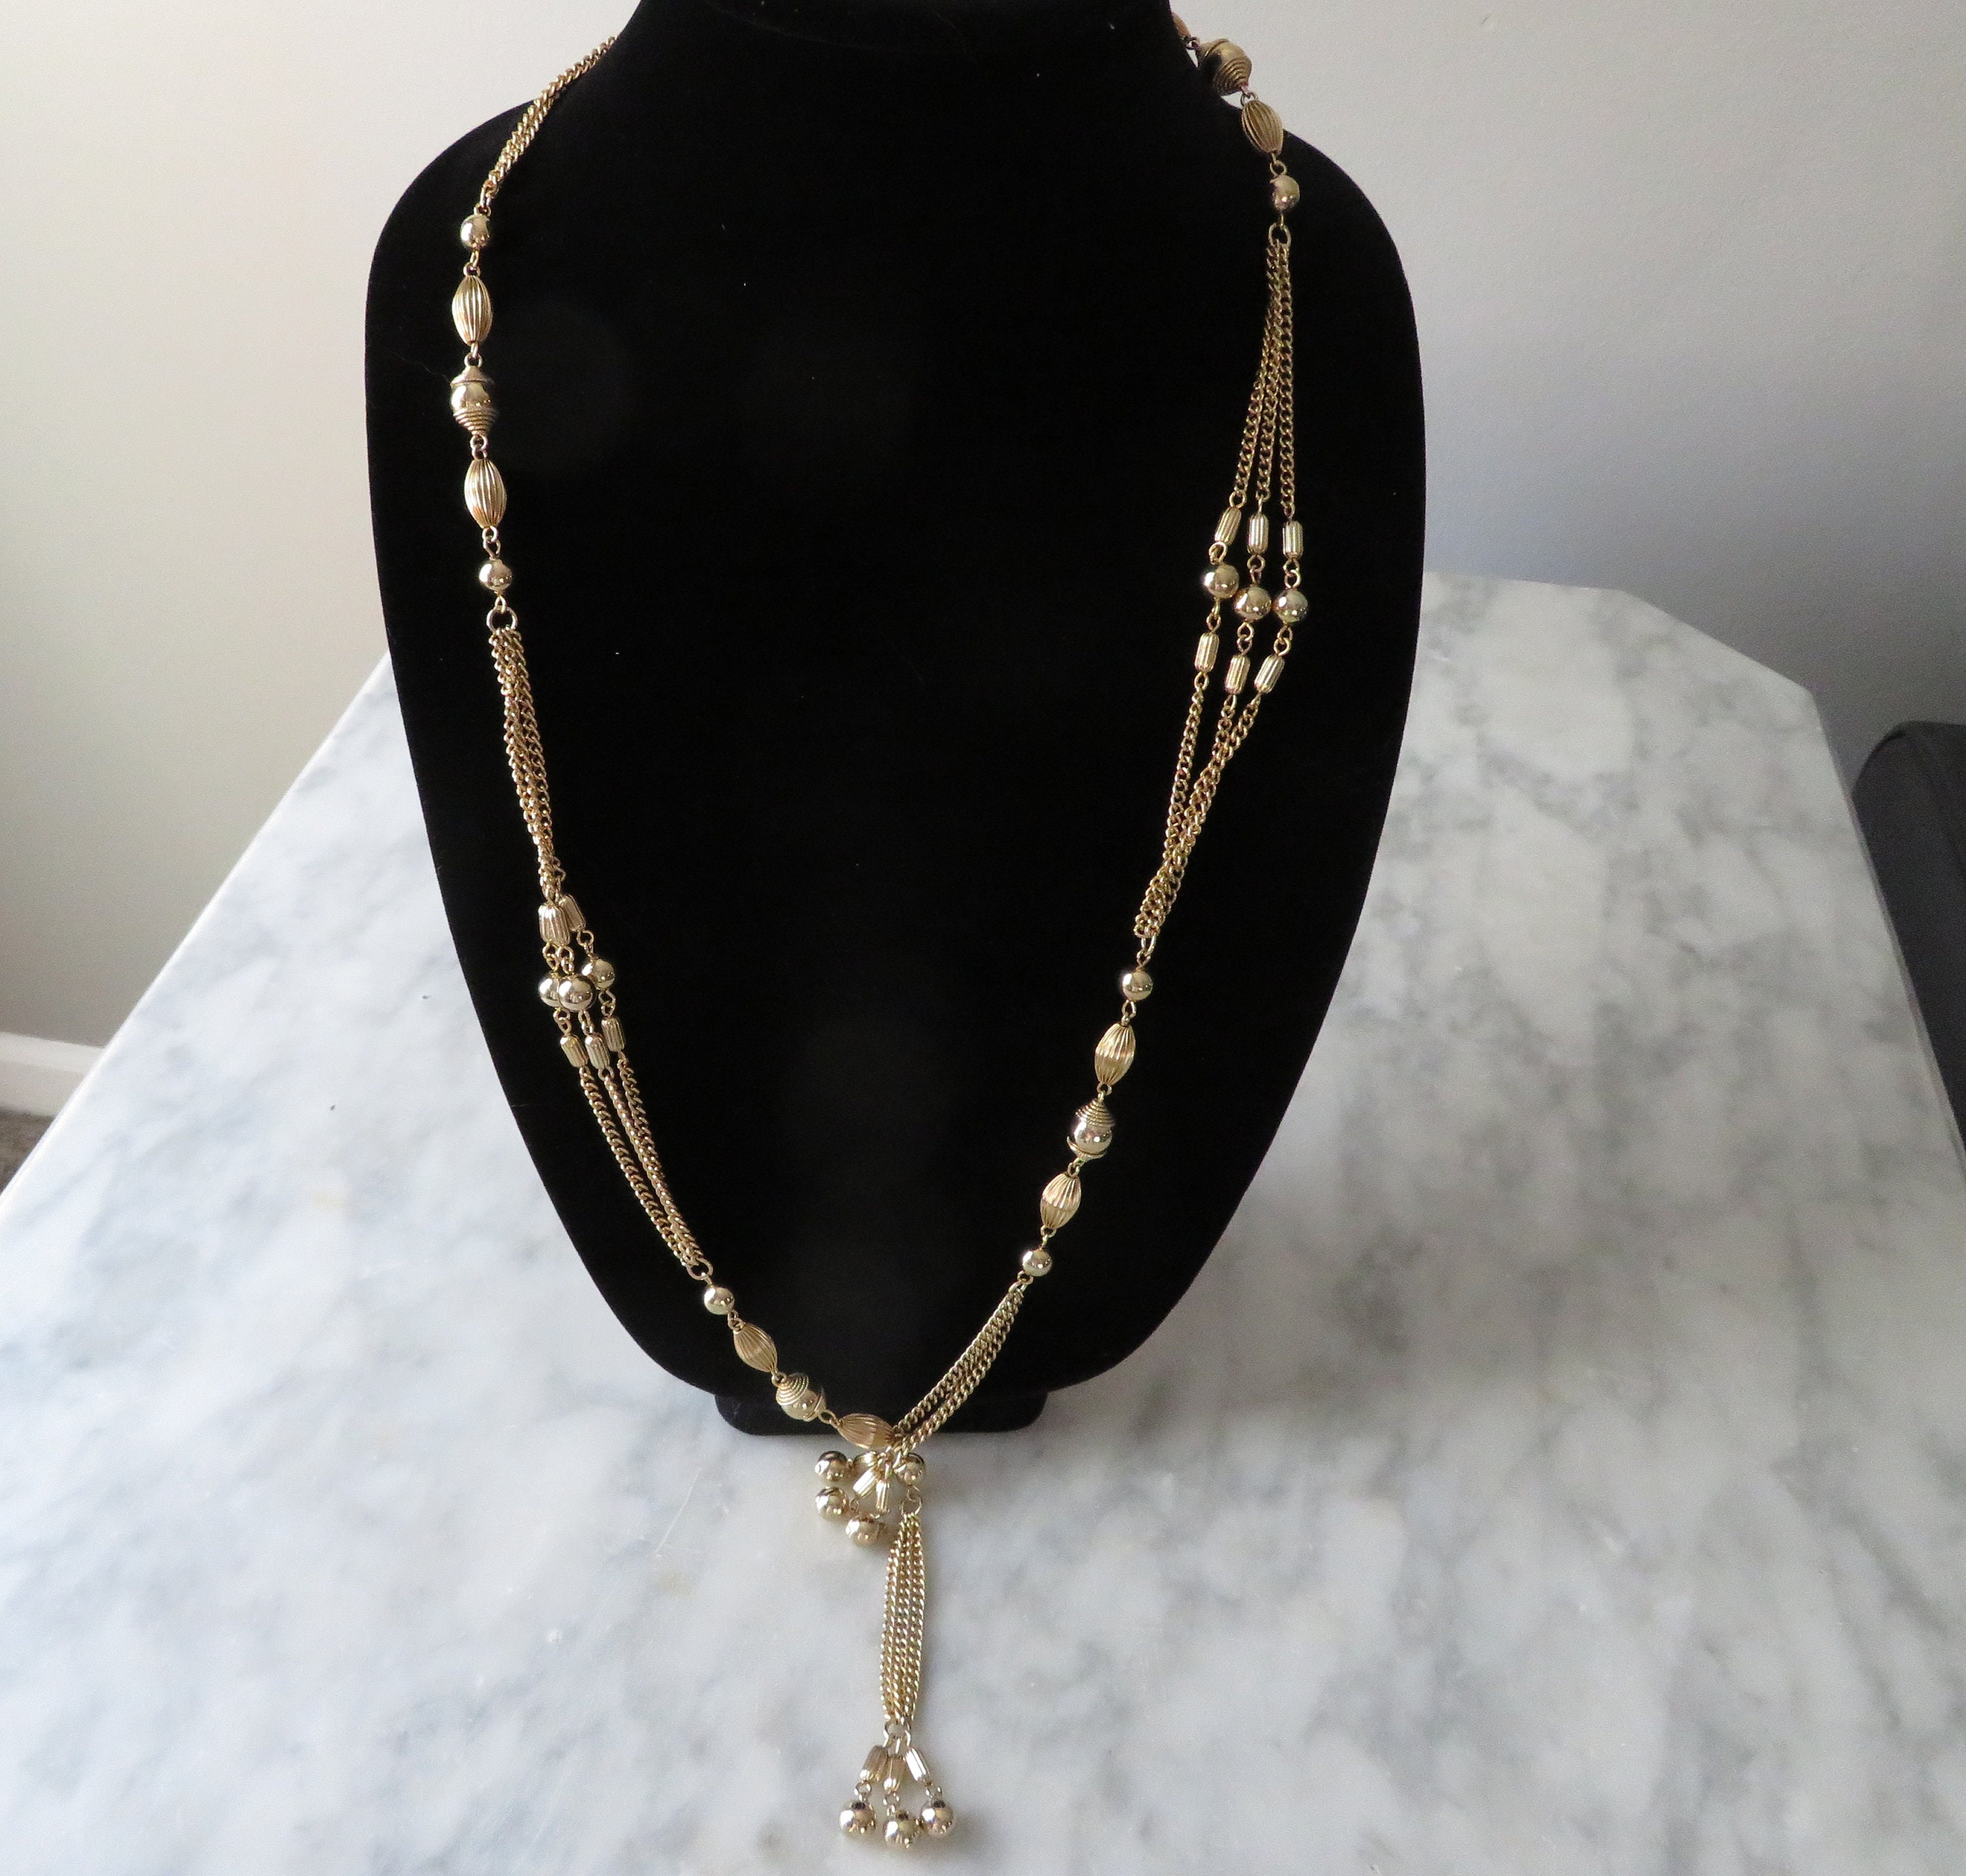 Vintage Gold Tone Signed Sarah Coventry Beaded Lariat Necklace - Etsy